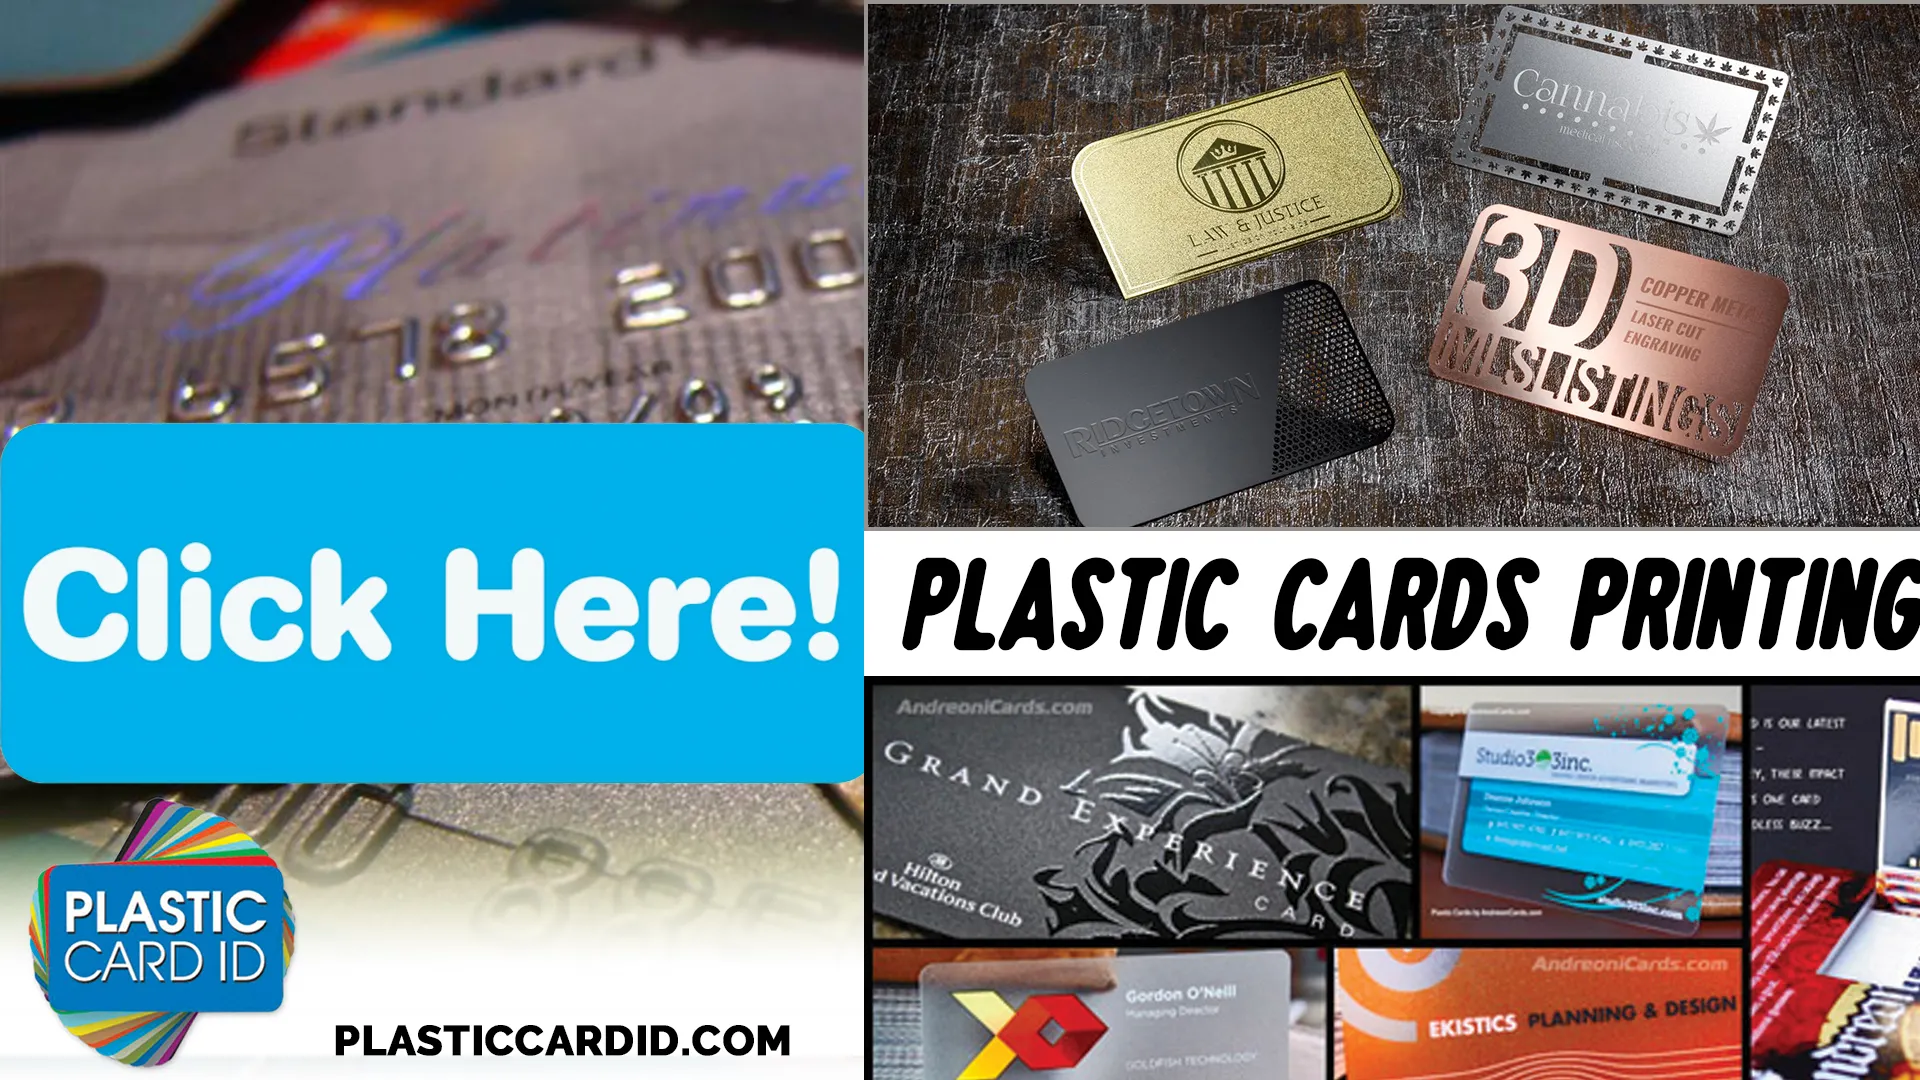 Plastic Card ID
: Harnessing Advanced Technology for Greener Printing